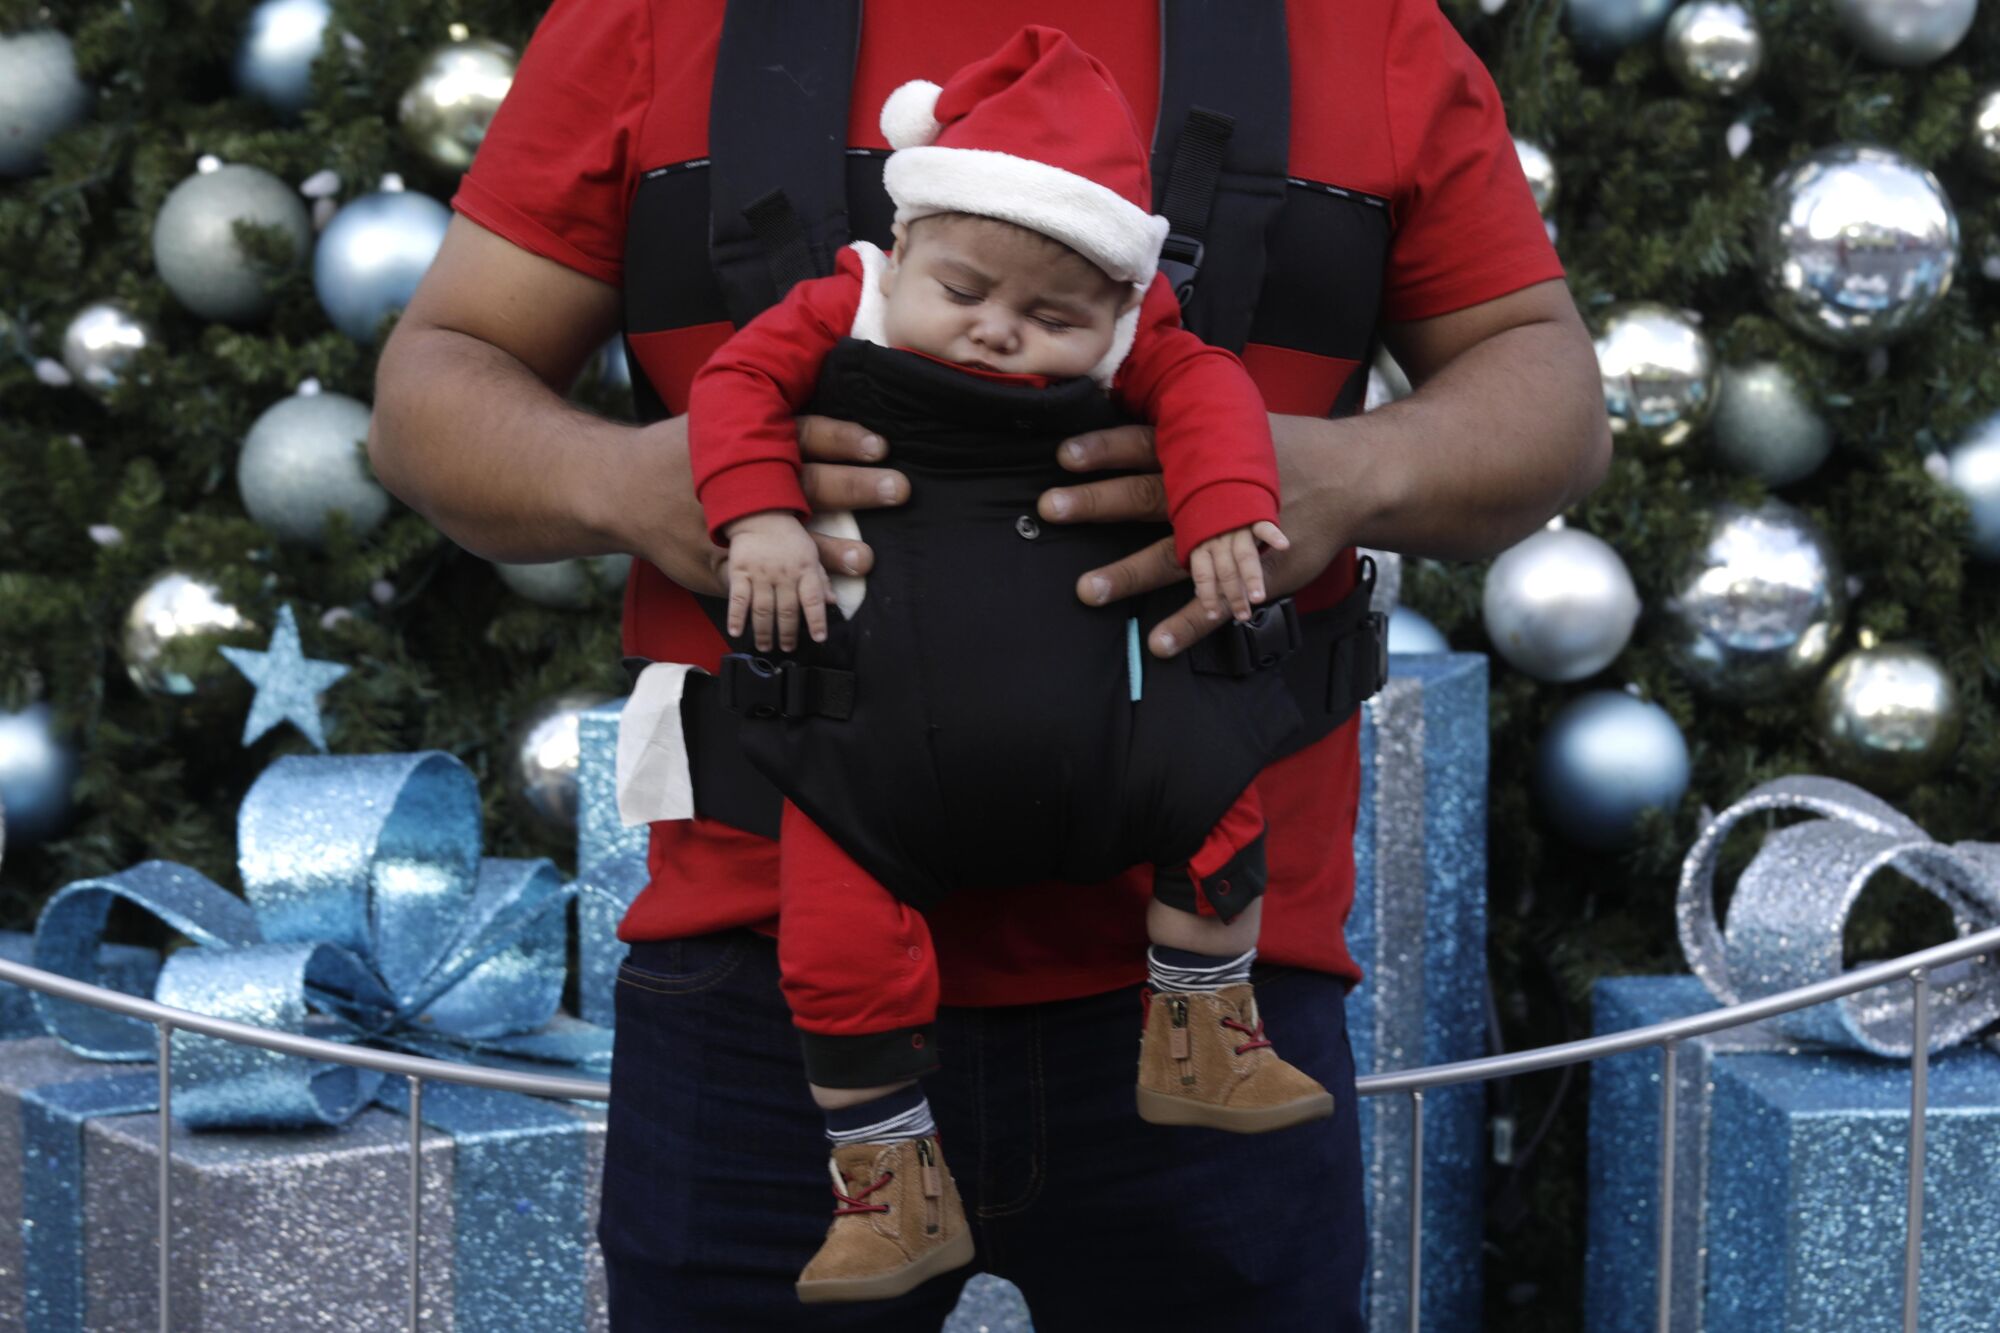 Jesse Aguilar, 2 months old, sleeps while strapped to his father, Jesus Aguilar.